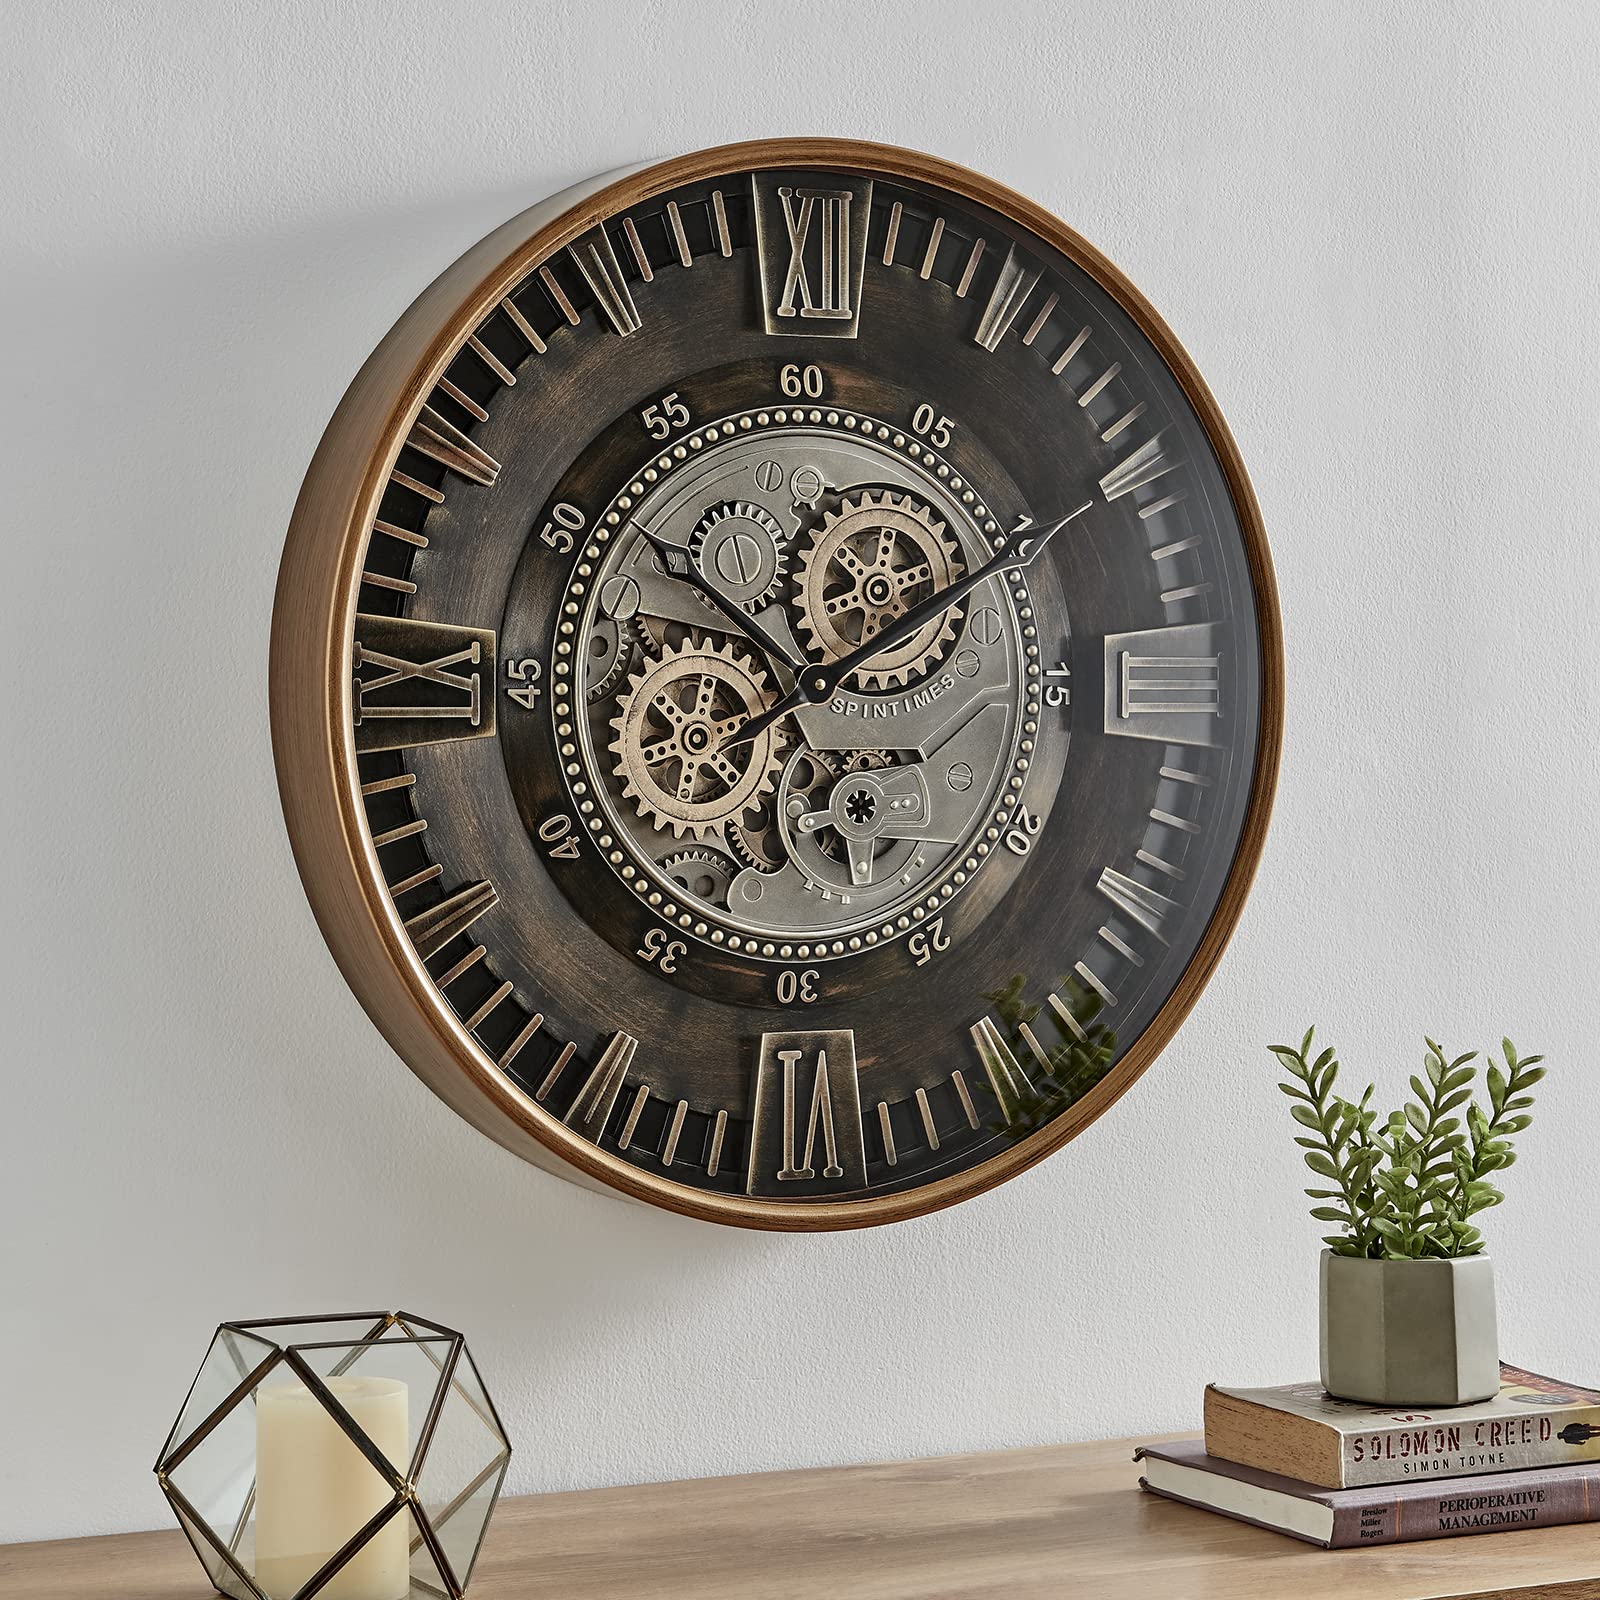 1st owned Large Wall Clock, Metal Retro Roman Numeral Clock, Modern Round  Silent Wall Clocks, Easy to Read for Living